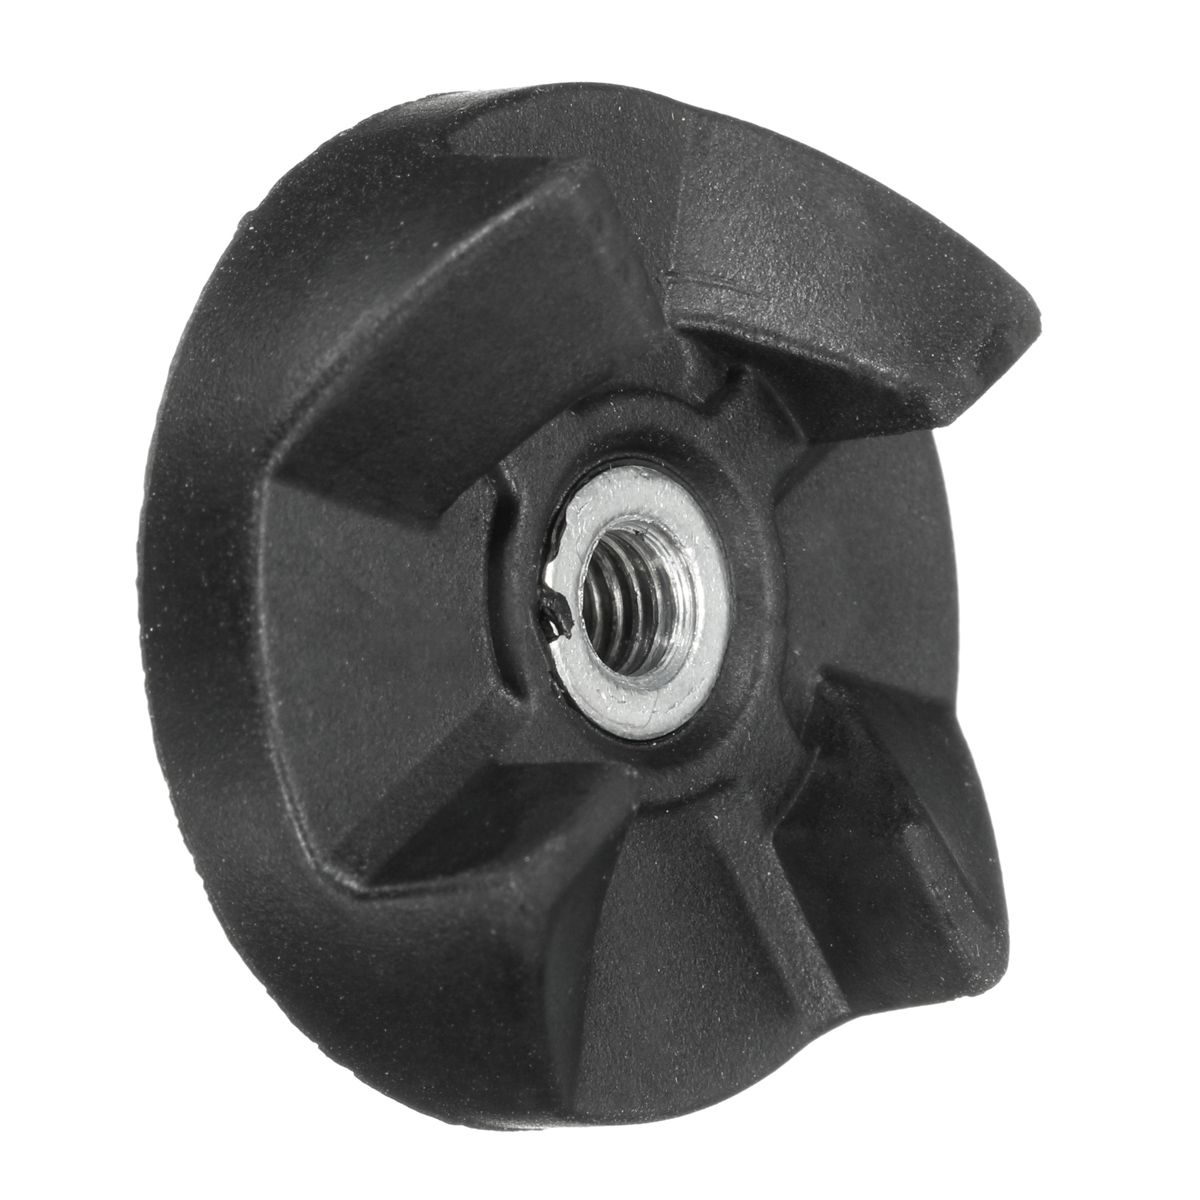 3-Plastic-Gear-Base-and-2-Rubber-Blender-Replacement-for-Magic-Mixer-Spare-Parts-1617839